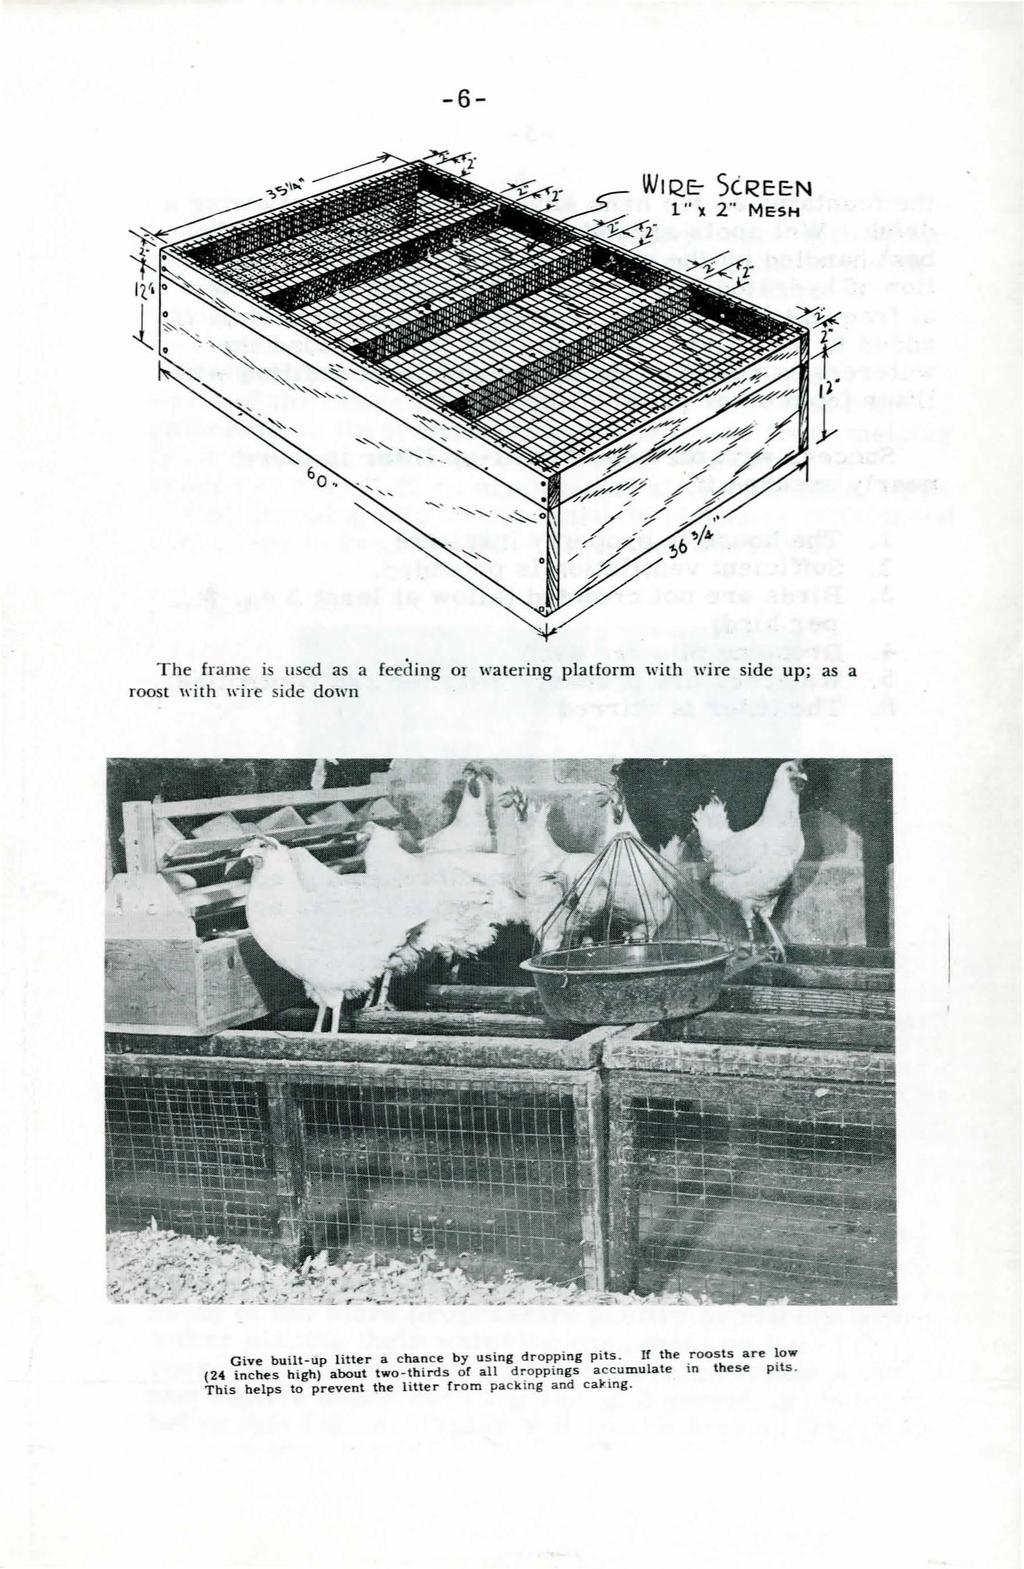 -6- The frame is used as a feeding or watering platform with wire side up; as a roost " ith 1.